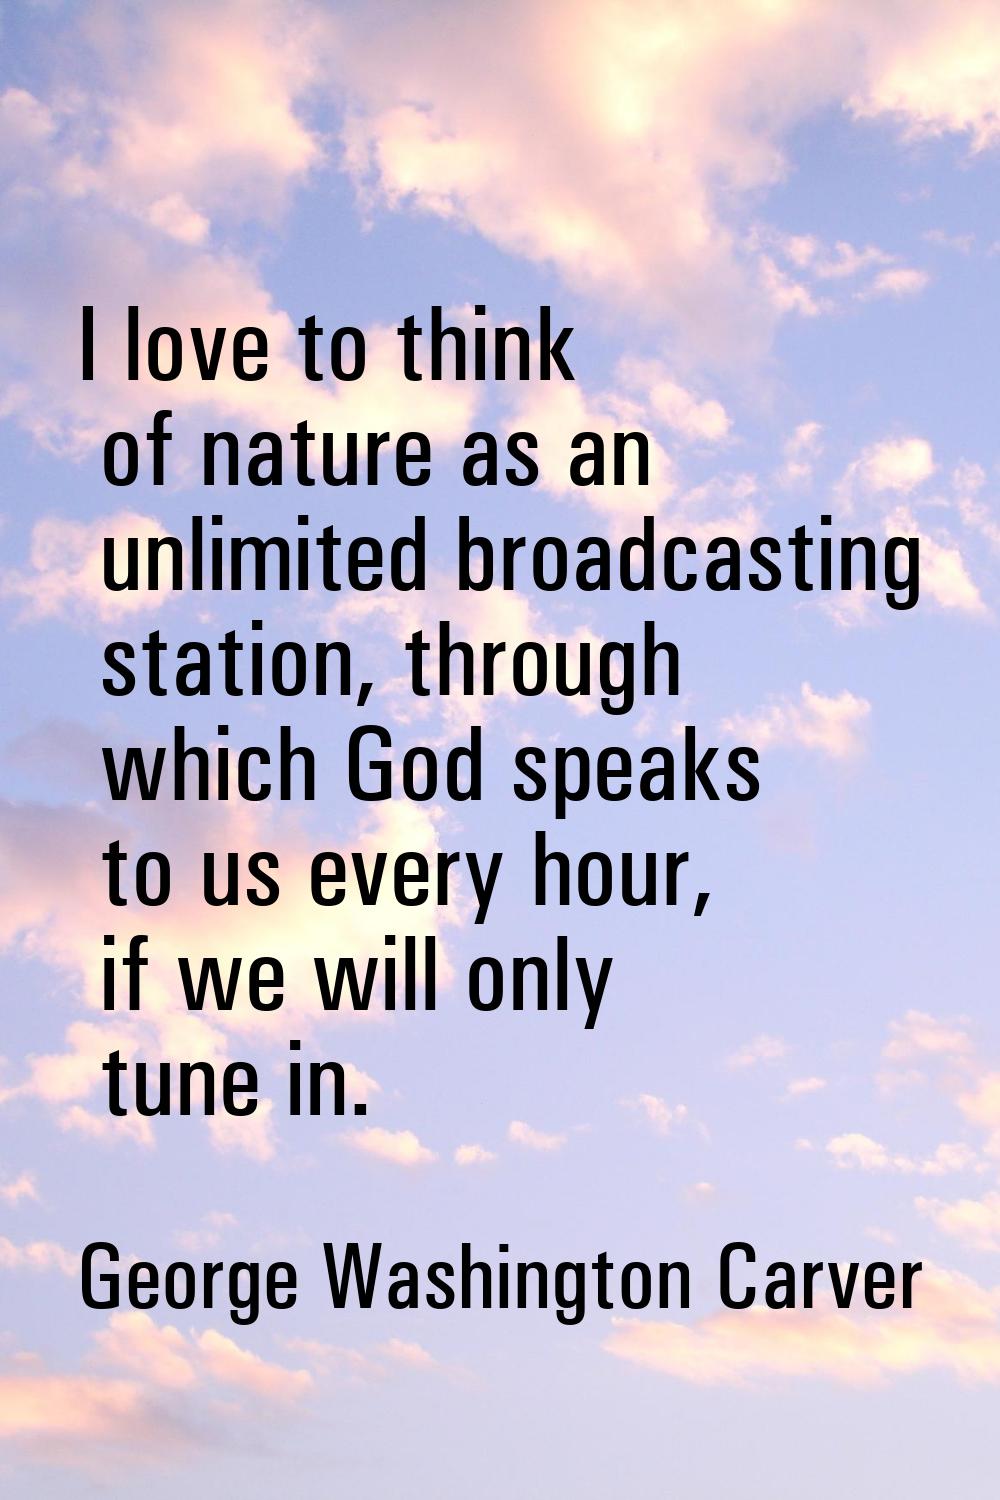 I love to think of nature as an unlimited broadcasting station, through which God speaks to us ever